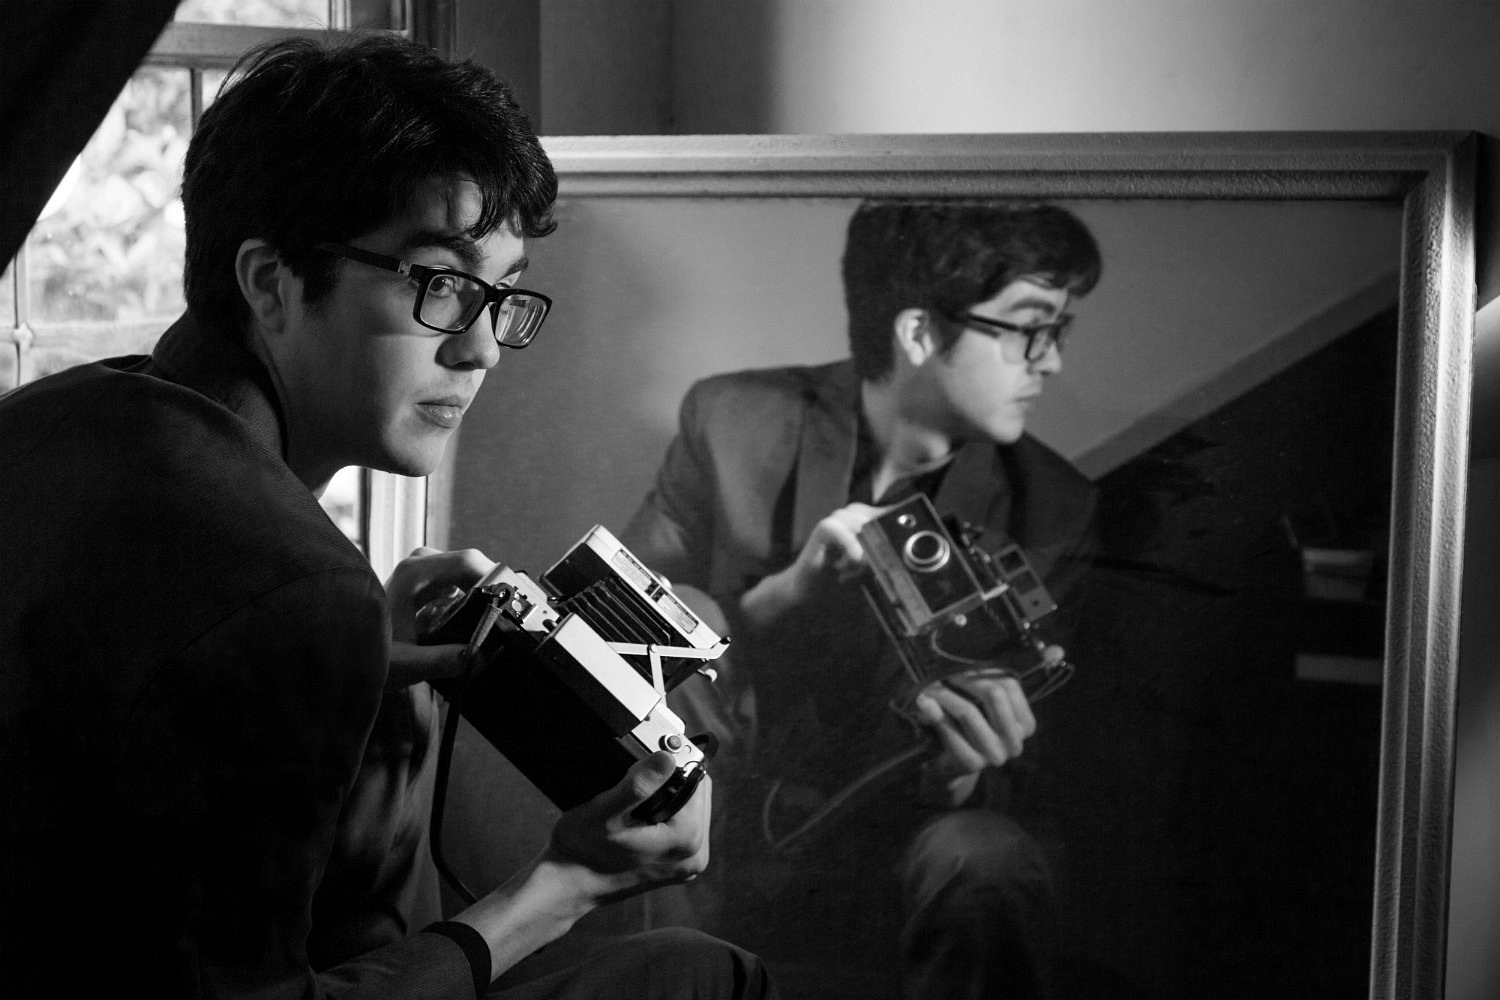 Car Seat Headrest: "I always end up developing a character on the album that’s not quite me"